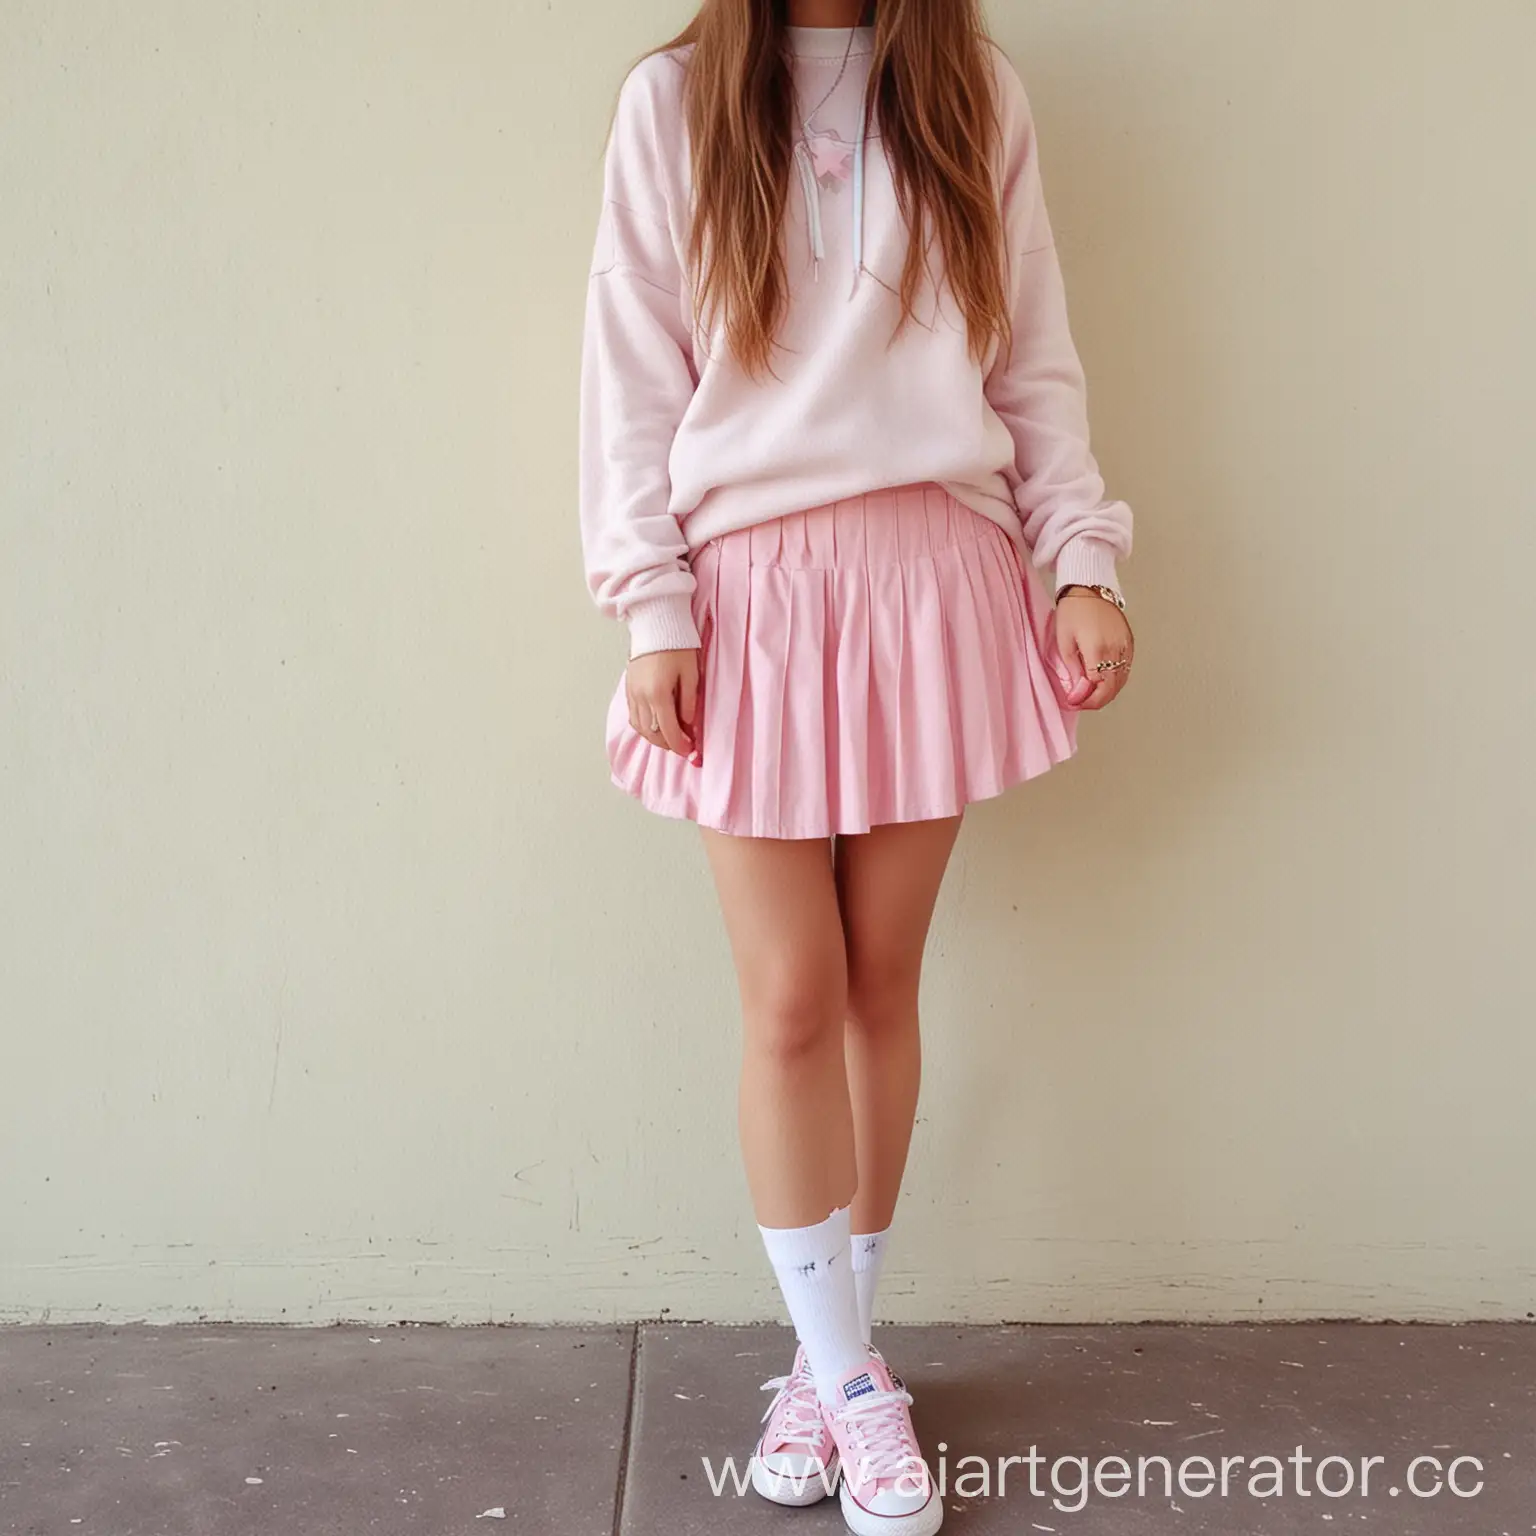 Adorable-Boy-in-Pastel-Pink-Skirt-and-Baggy-Sweater-with-White-Knee-Socks-and-Converse